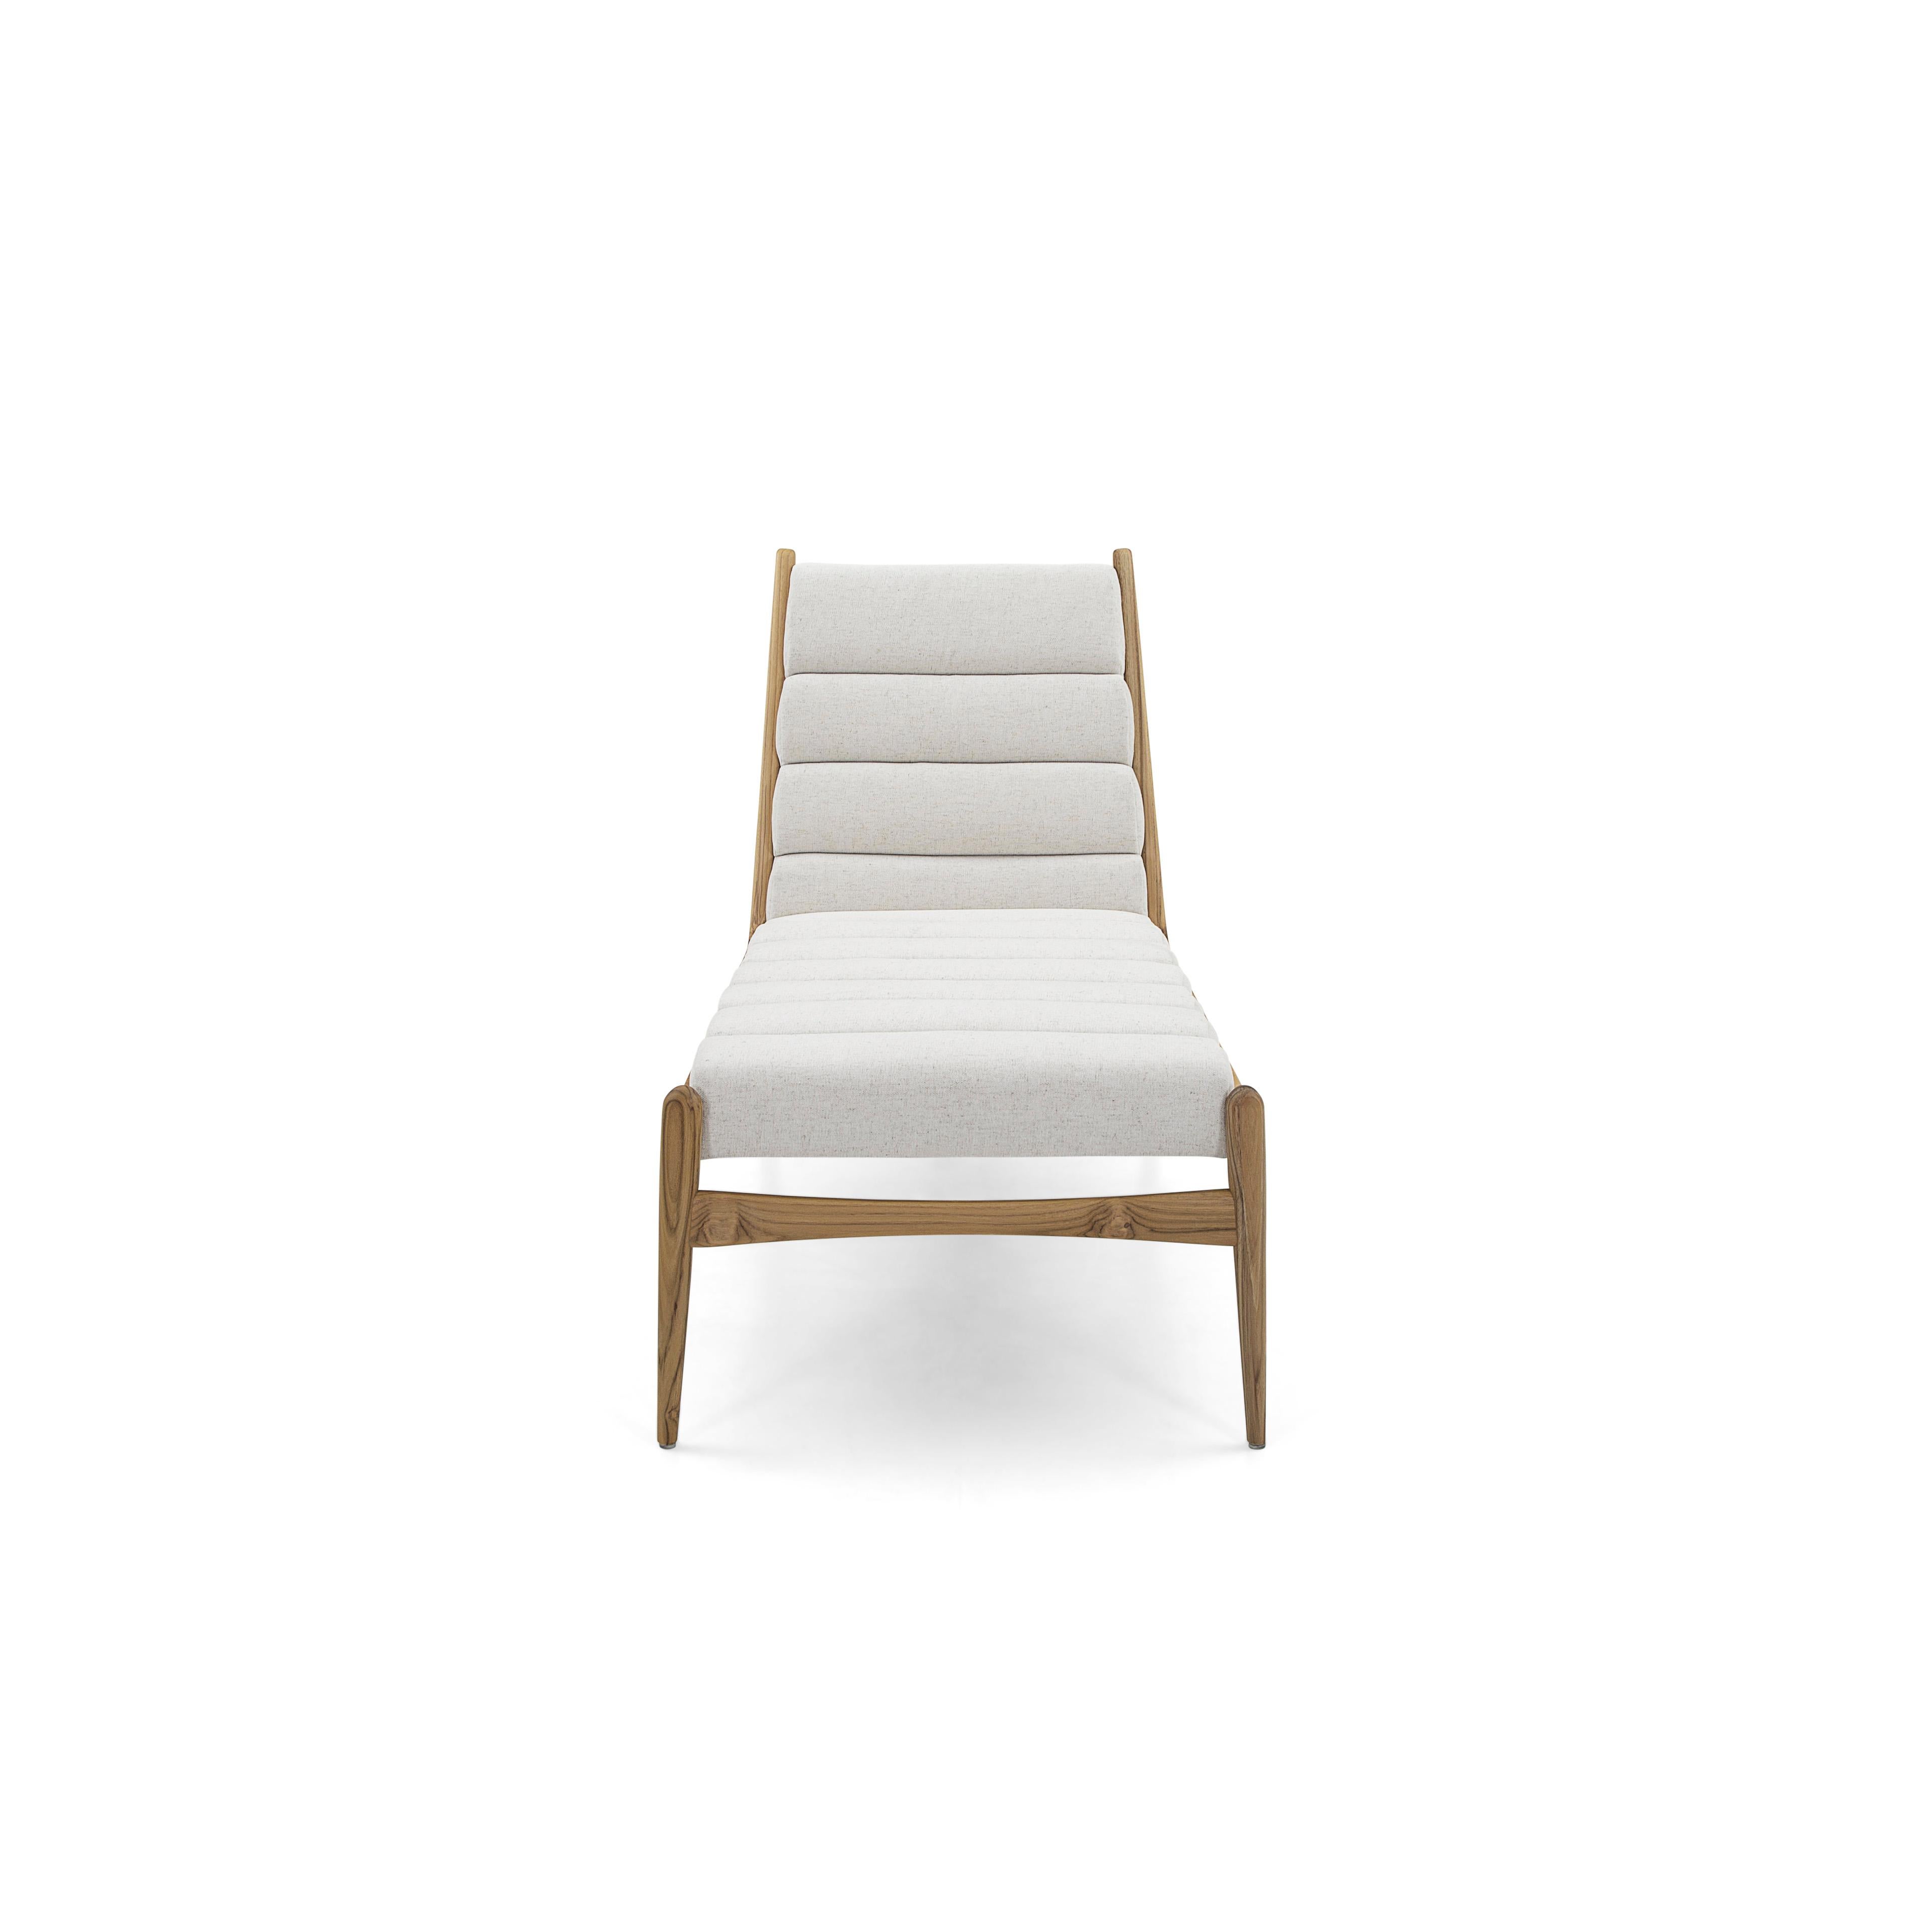 Brazilian Wave Chaise in Teak Finish and Light Fabric